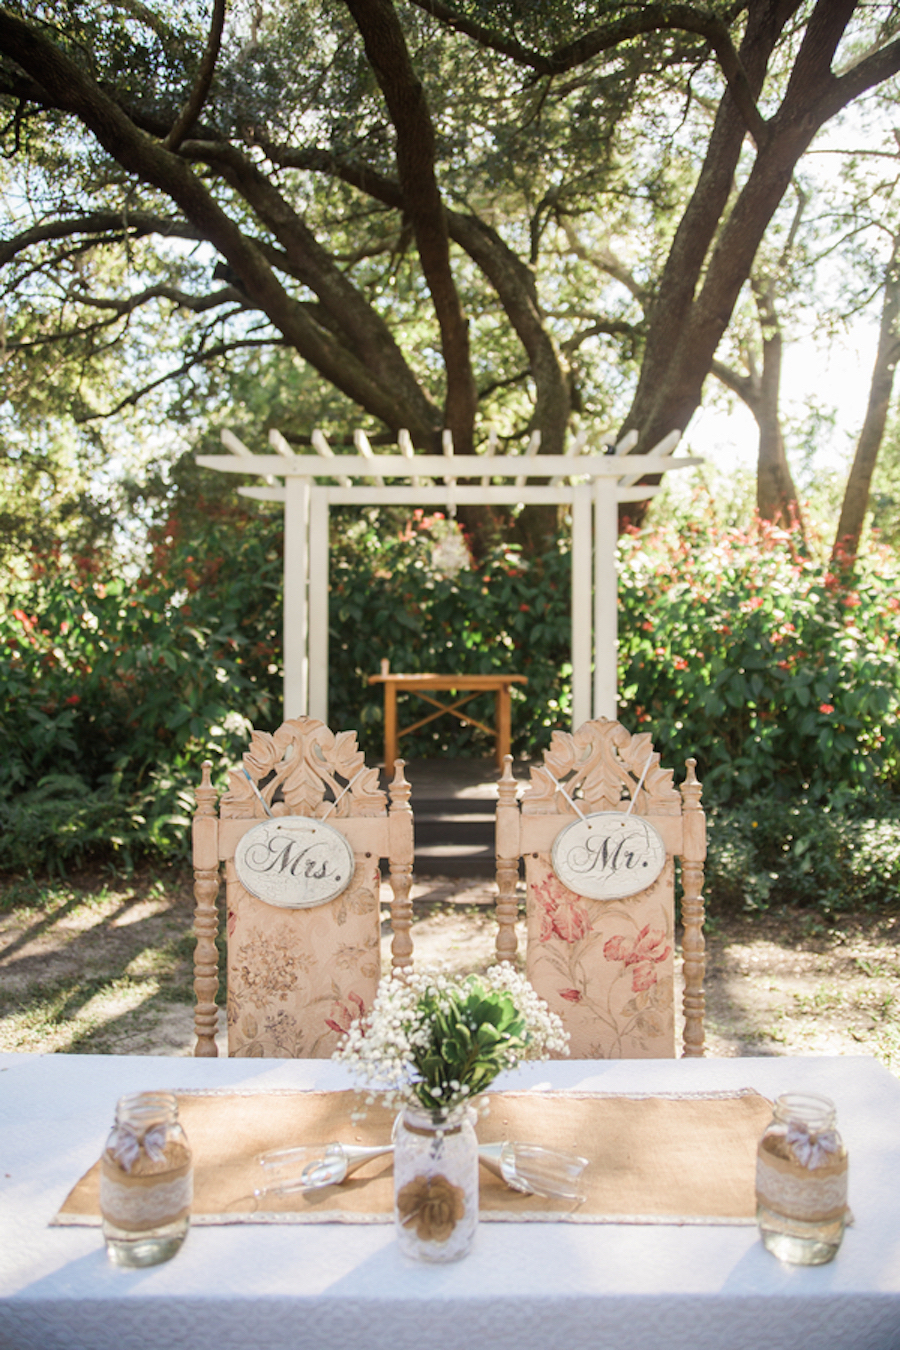 Burlap and Lace Mason Jar Centerpieces | Rustic Outdoor Tampa Bay Wedding Sweetheart Table with Mr and Mrs Signs and Vintage Chairs